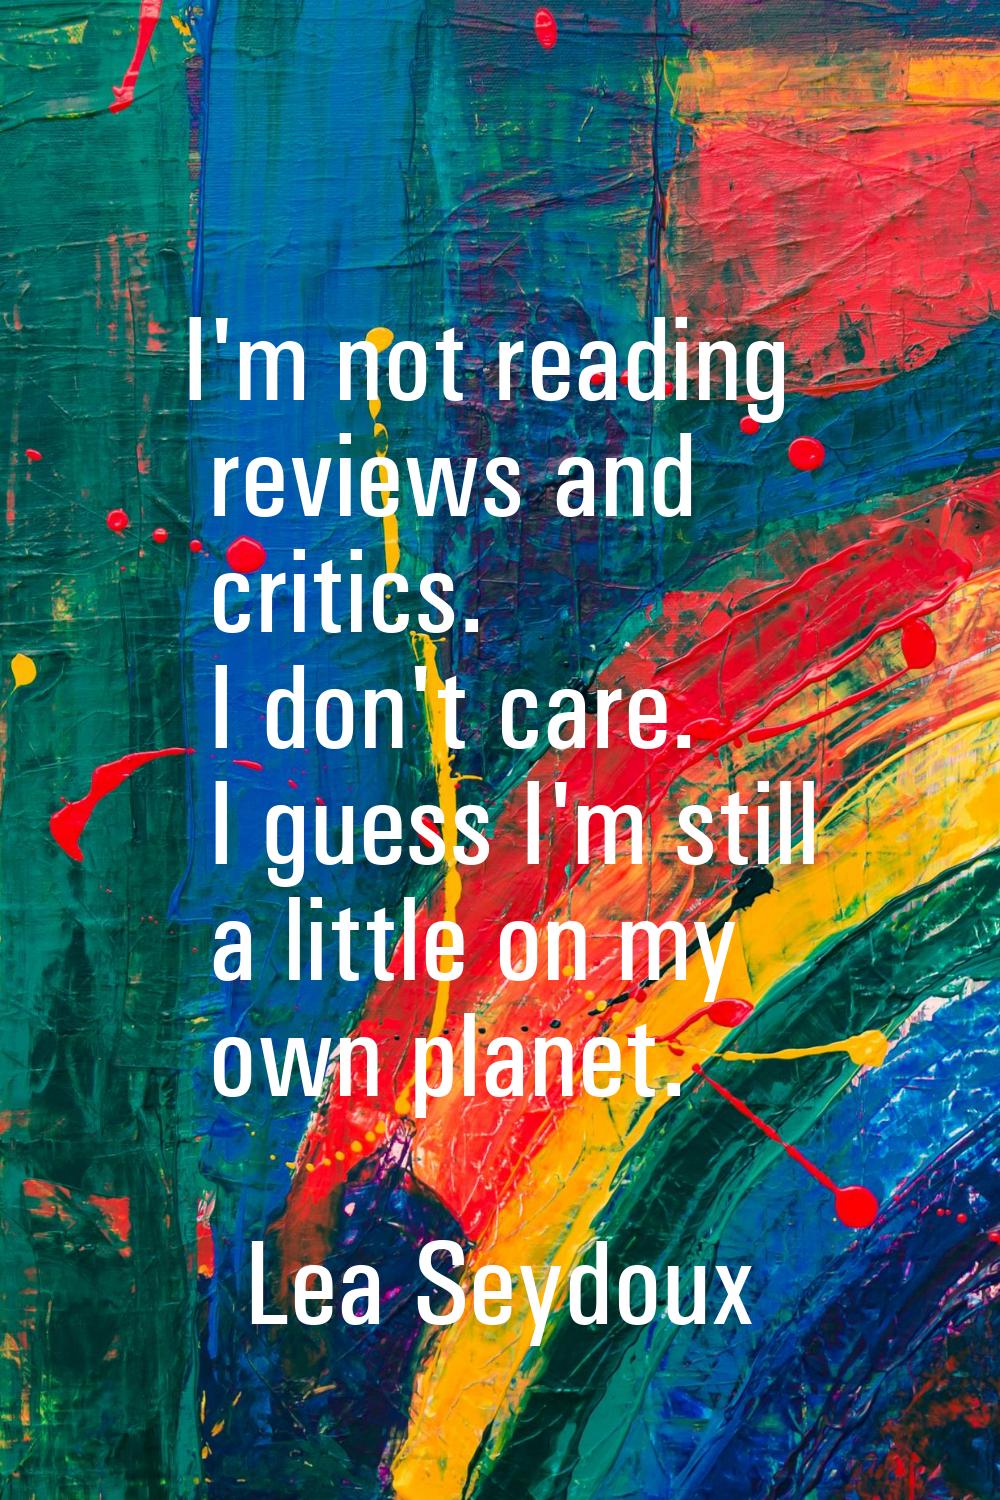 I'm not reading reviews and critics. I don't care. I guess I'm still a little on my own planet.